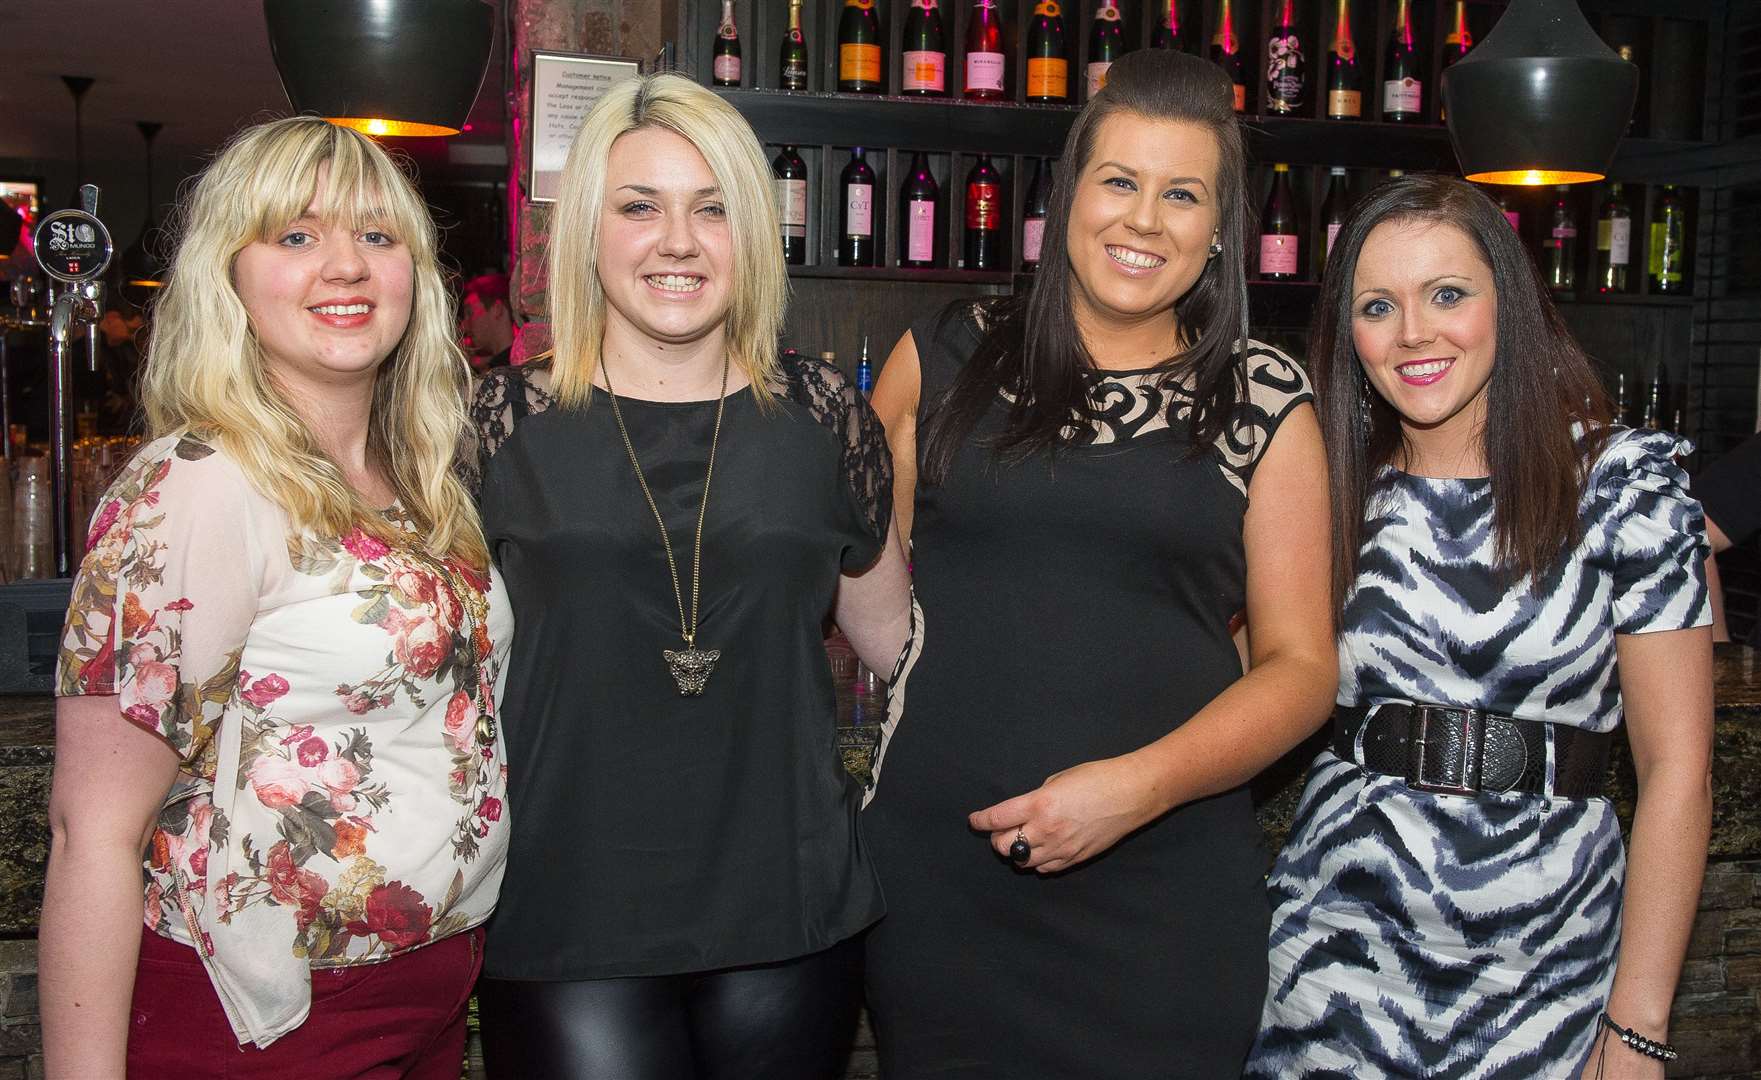 City Seen 12JAN 2013..Having a girls night out in the Den are (left to right) Stacie Fraser, Heather Thompson, Lisa MacPherson and Roz Maclean...Picture: Callum Mackay. Image No. 020851.